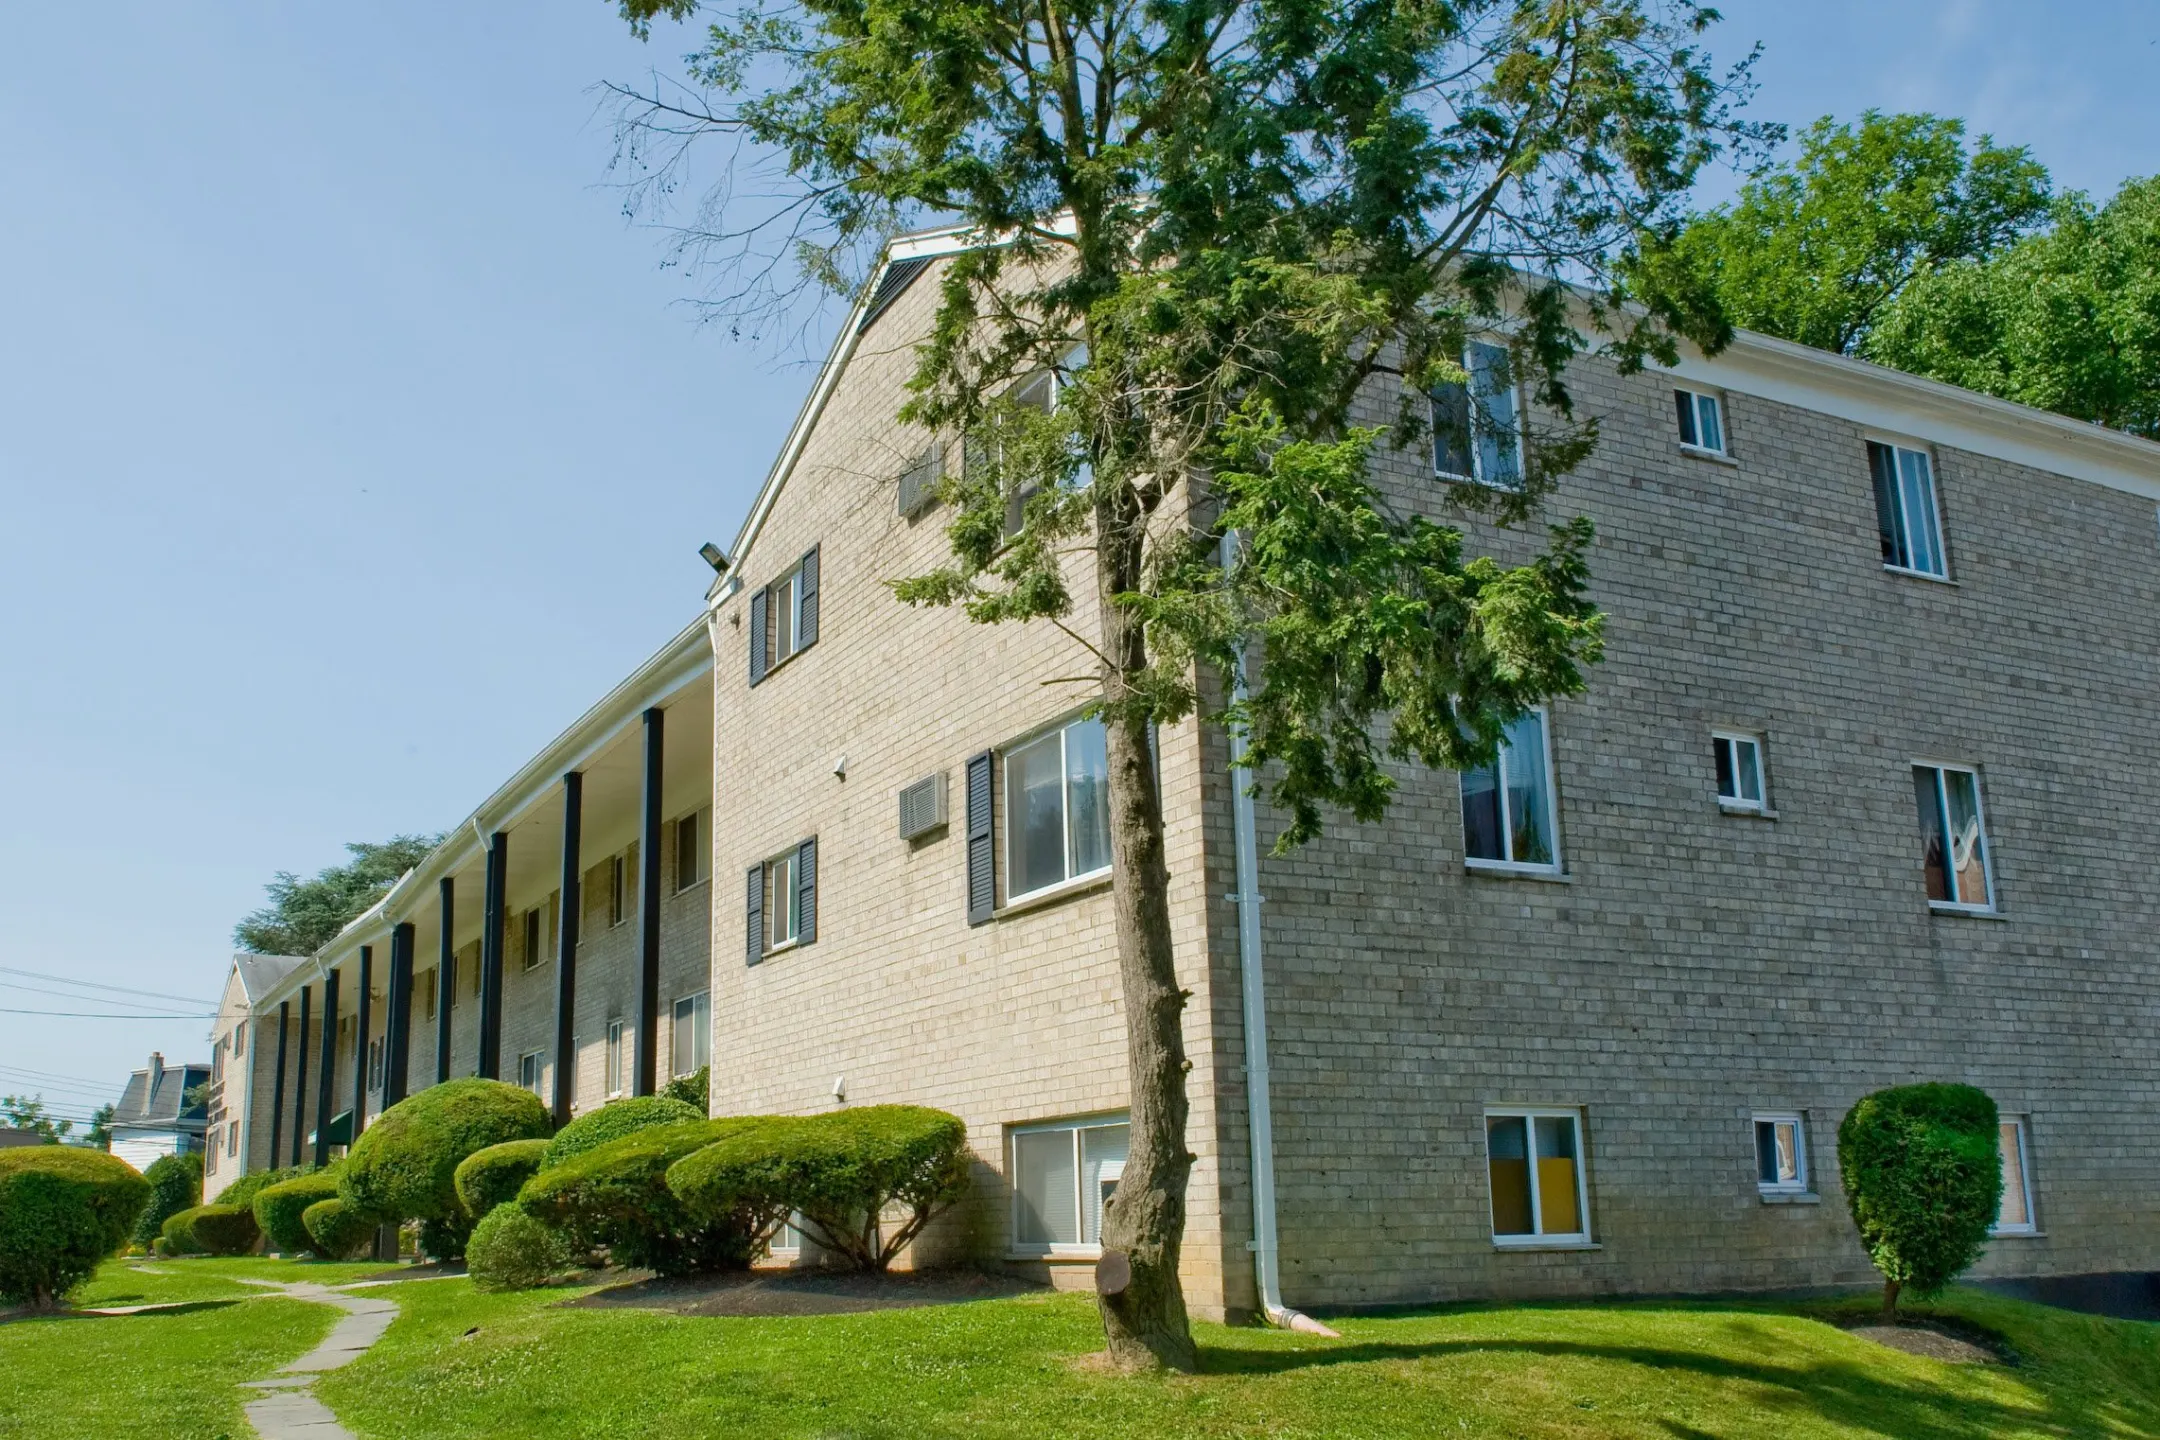 Building - Green Forest Apartments - Chester, PA